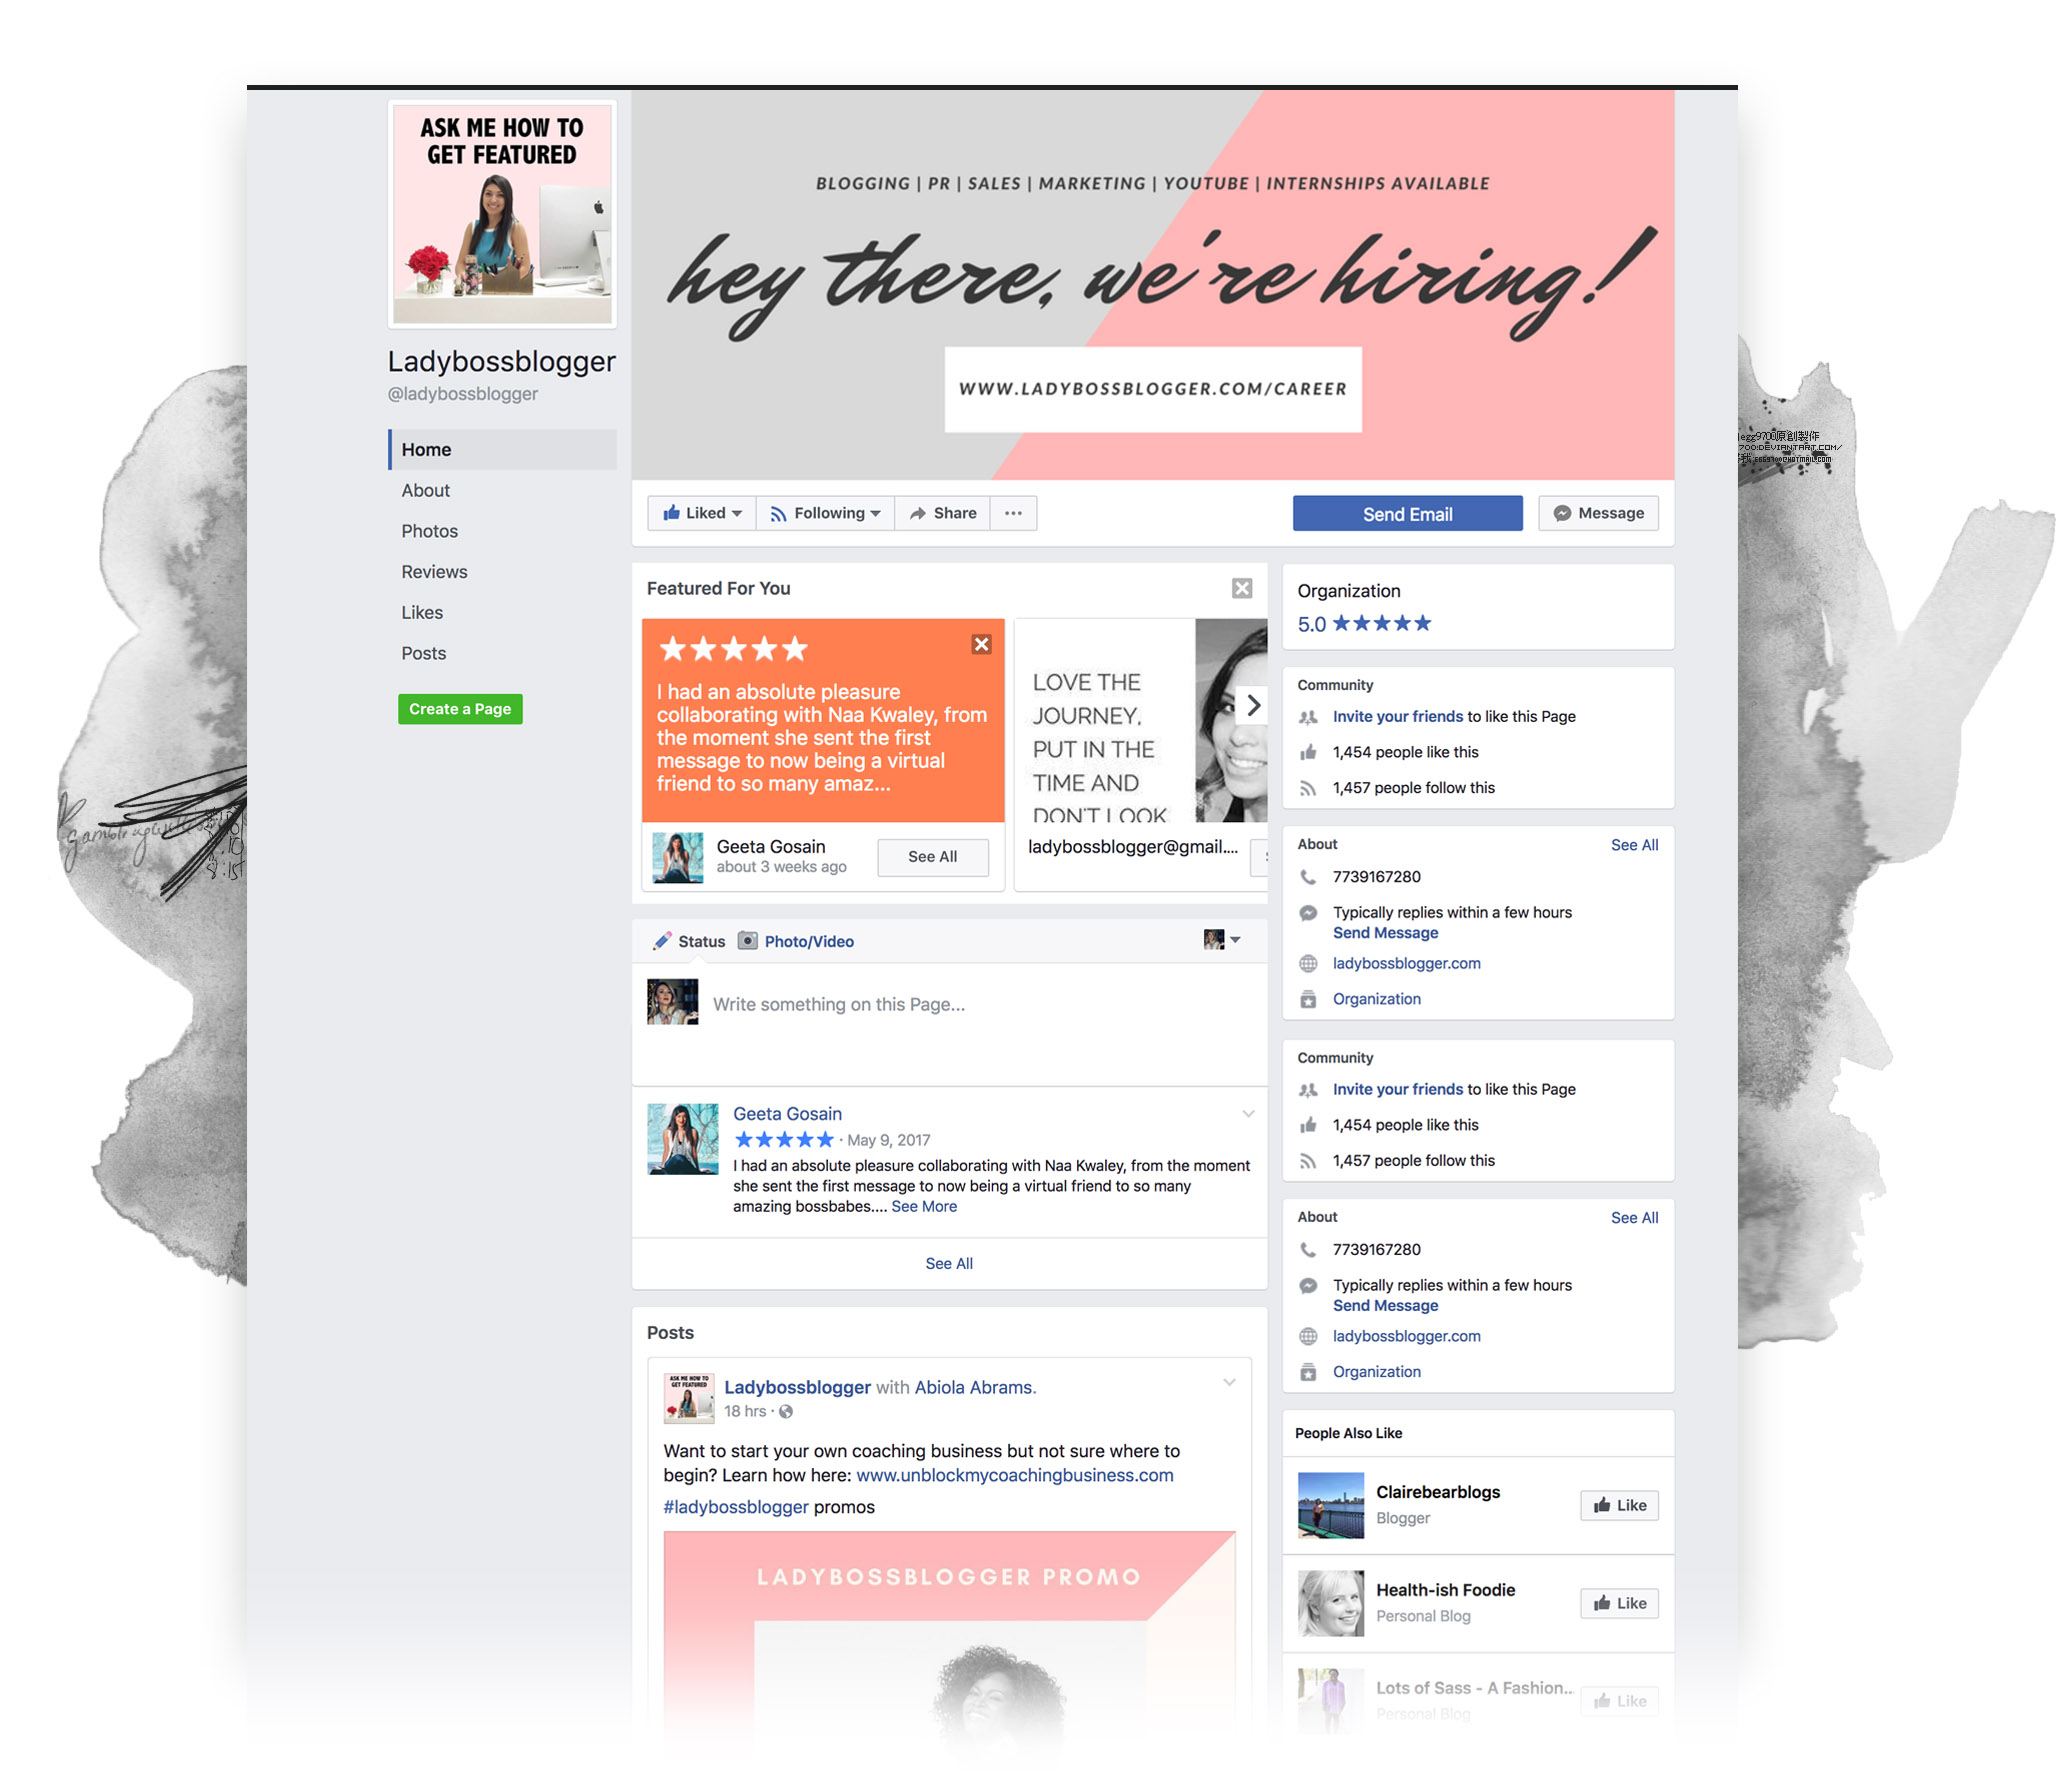 Lady Boss Blogger Facebook Page